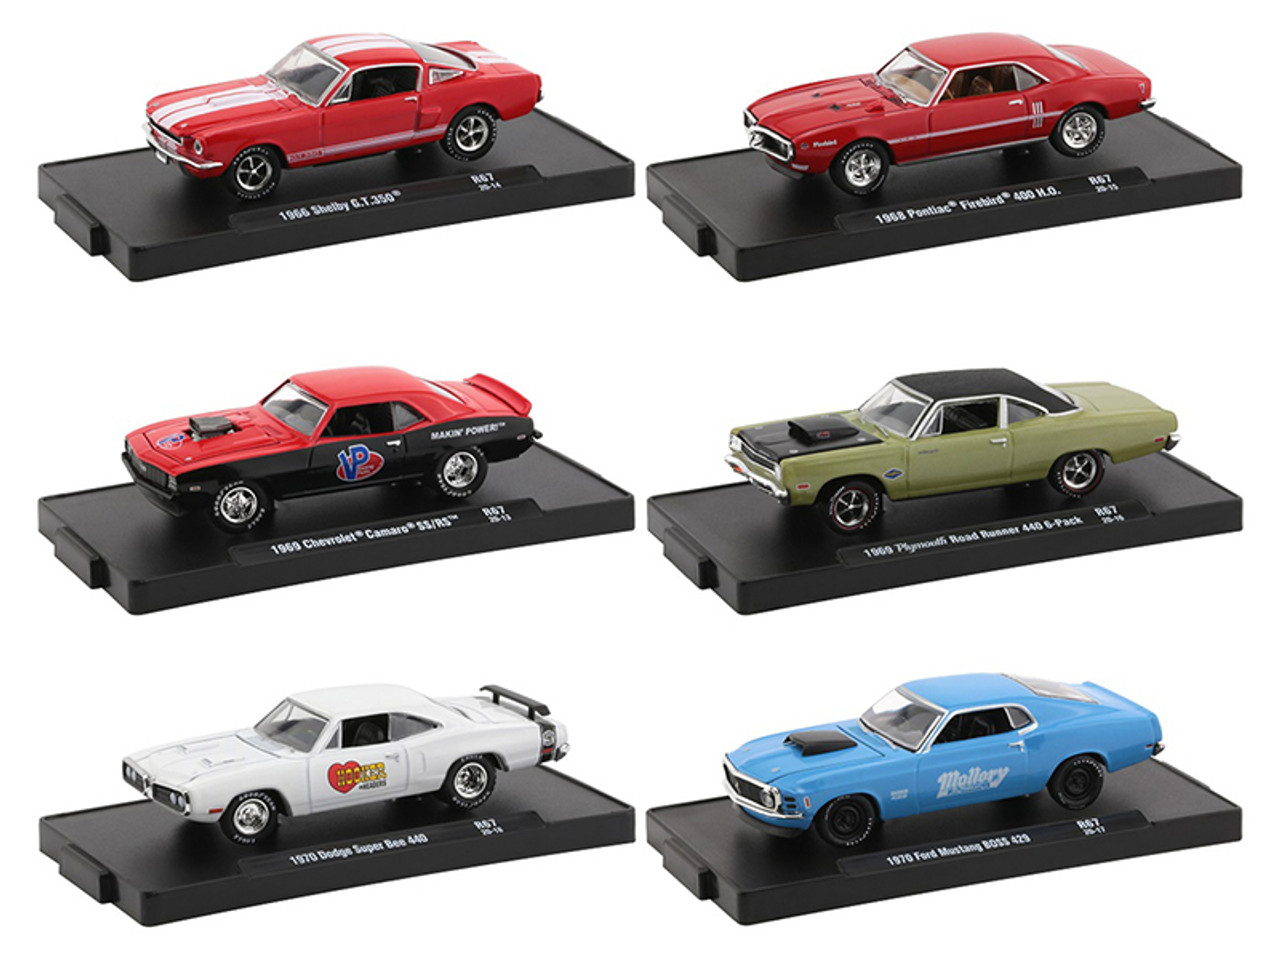 "Drivers" Set of 6 pieces in Blister Packs Release 67 Limited Edition to 6000 pieces Worldwide 1/64 Diecast Model Cars by M2 Machines